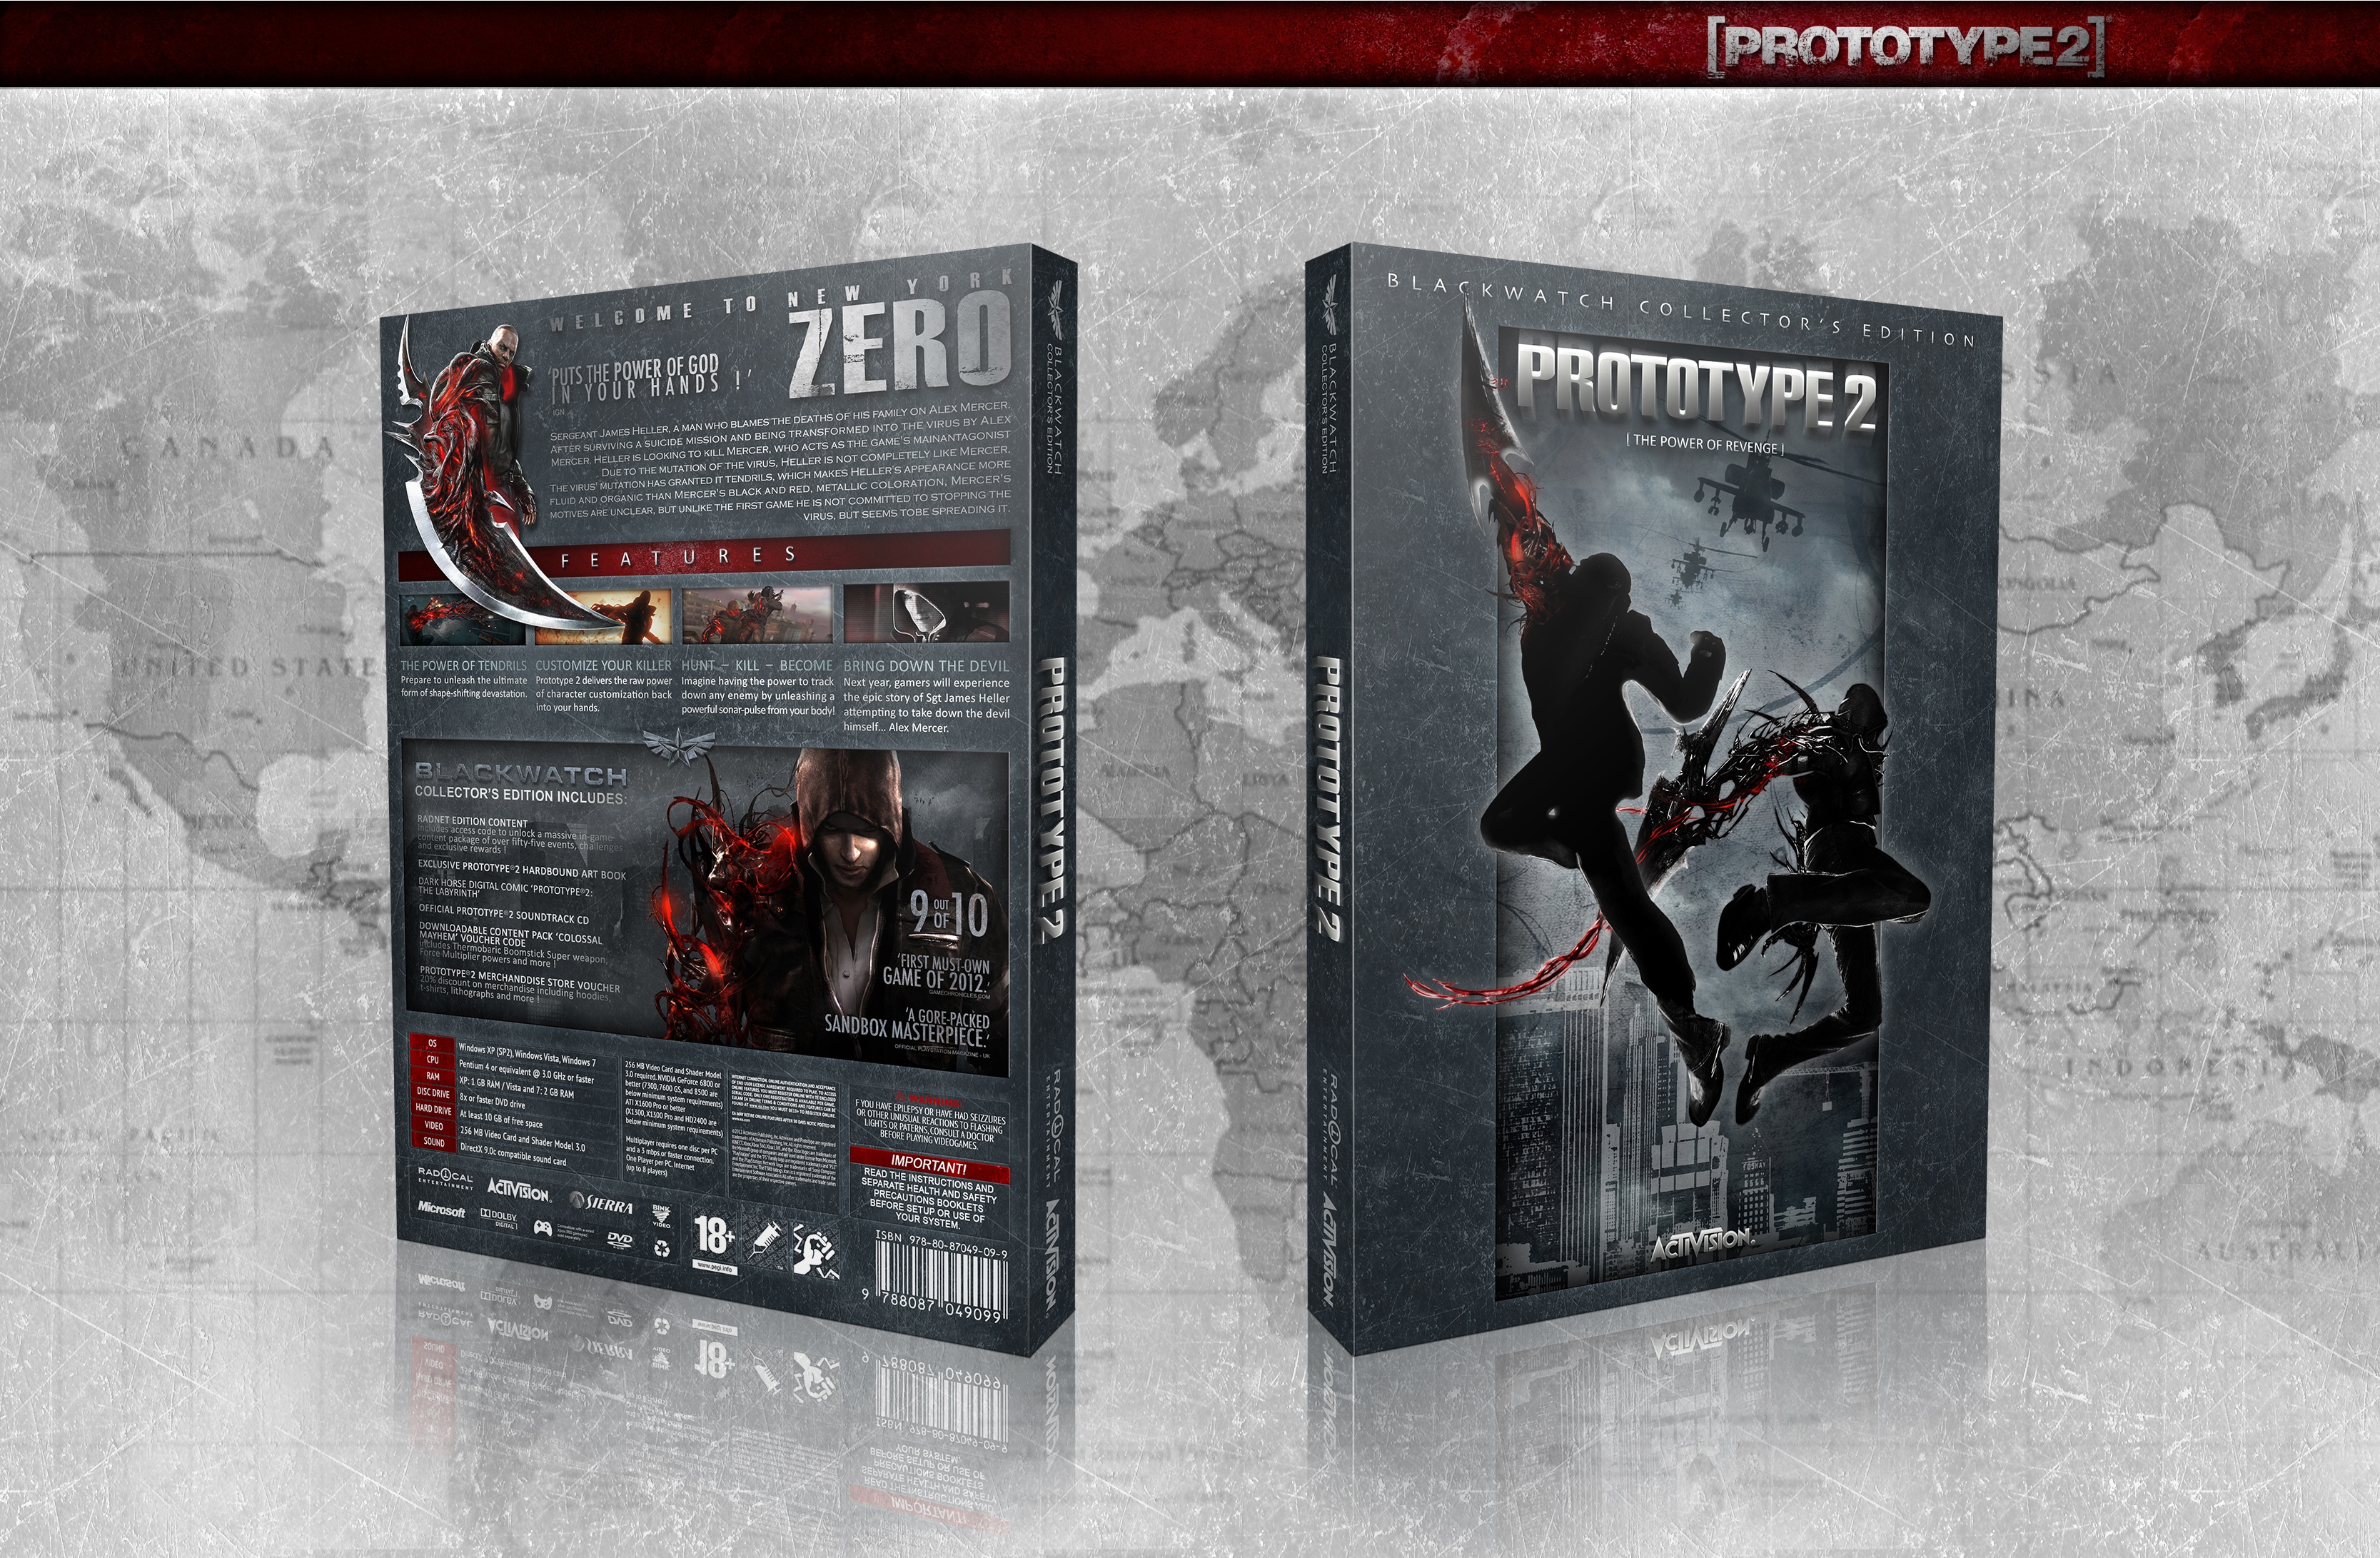 Prototype 2 Blackwatch Collector's Edition box cover